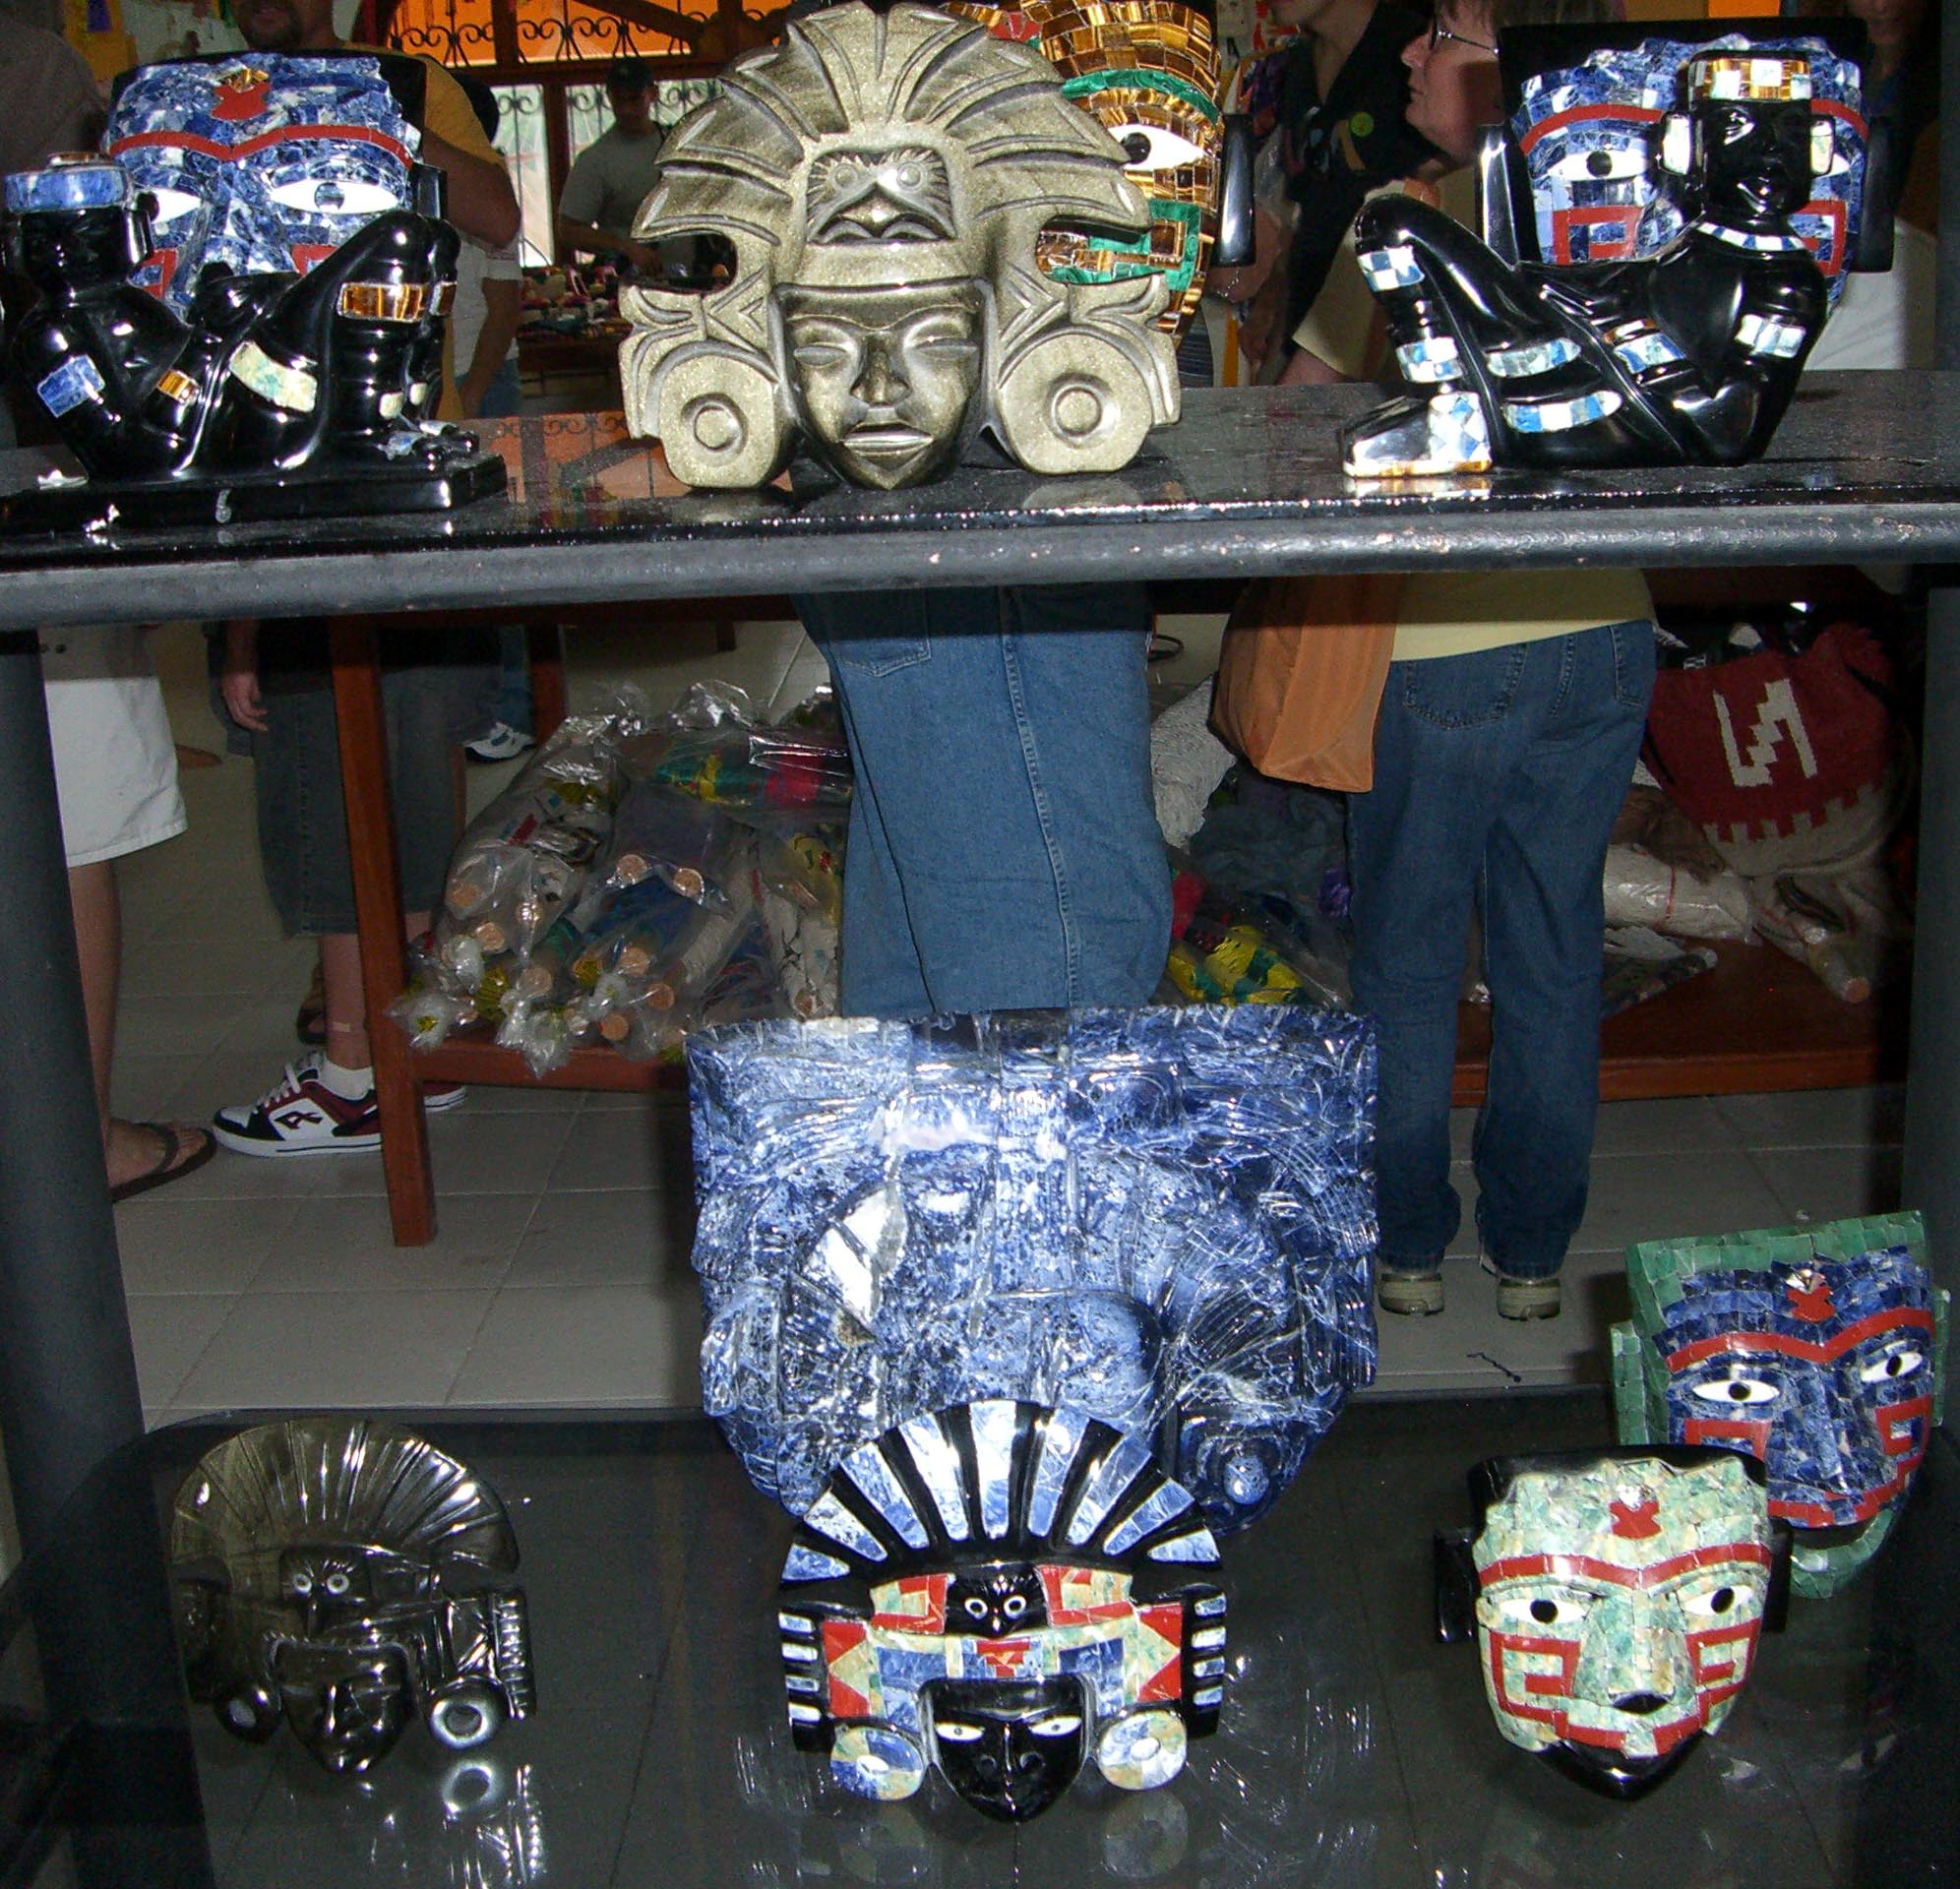 Replicas of Mayan artifacts made and sold in a souvenir shop in Mexico on the way to the ruins of Tulum.